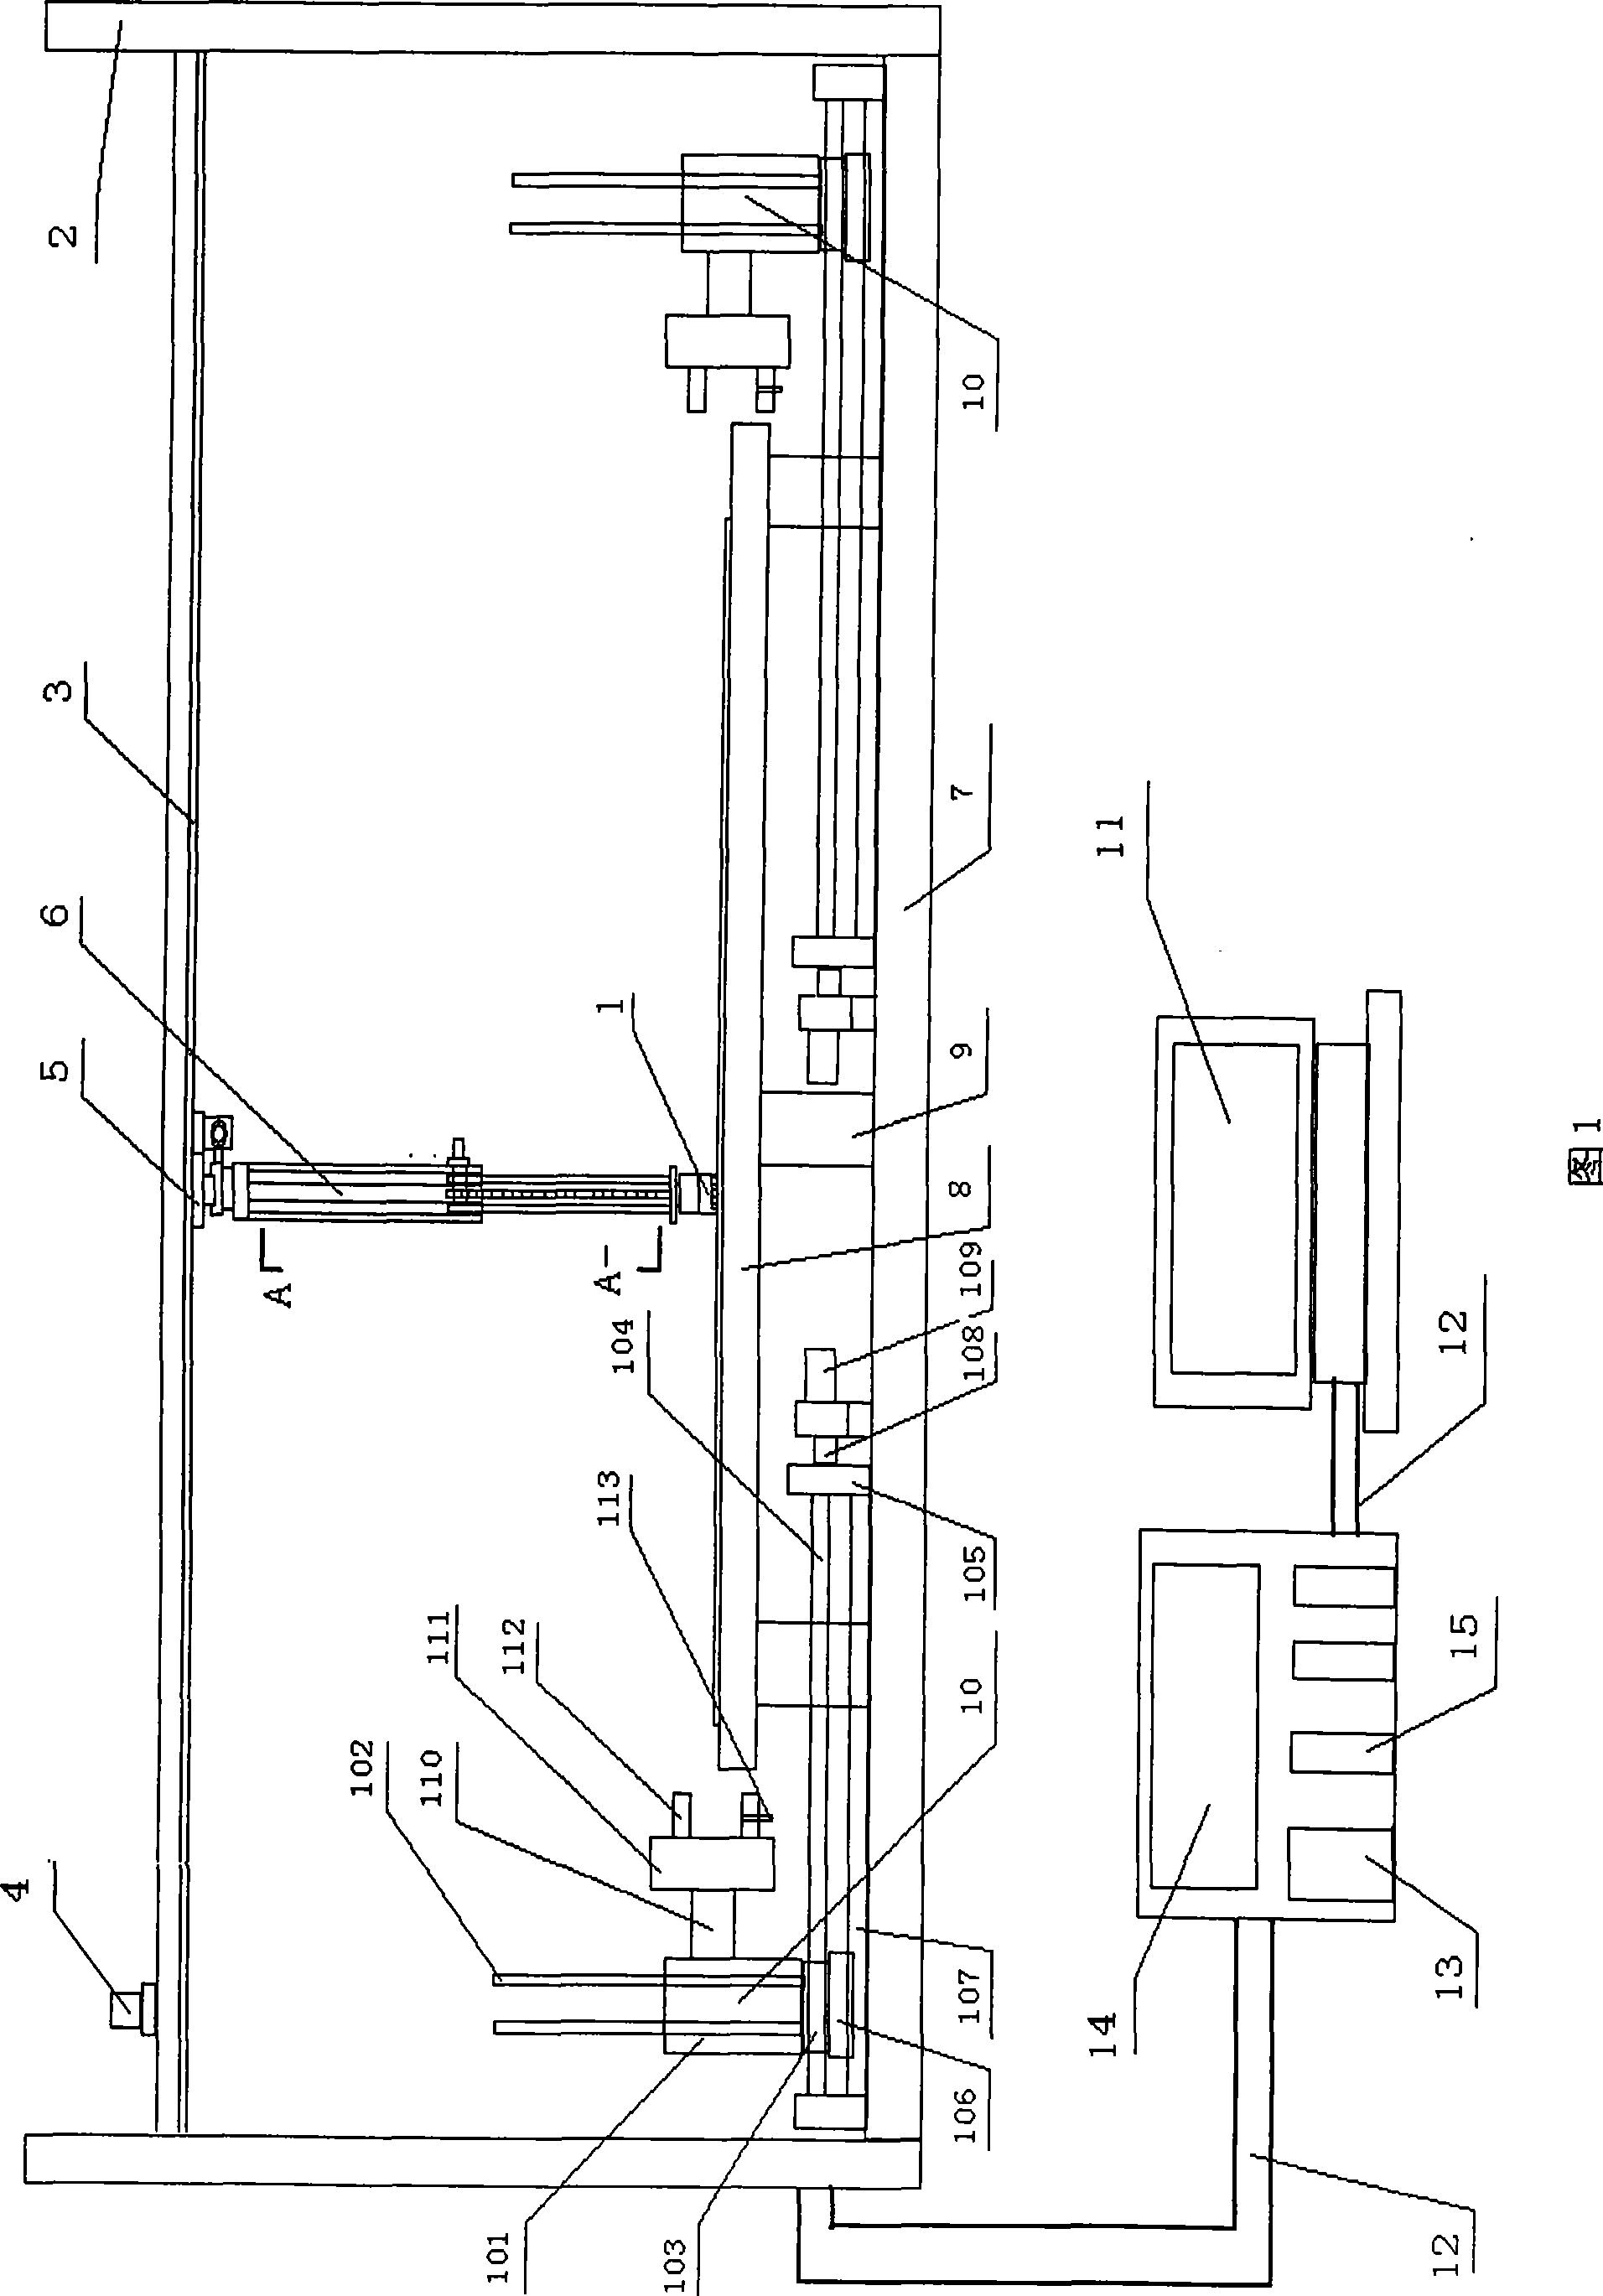 Device for testing resistance across steel plate surface for appliances